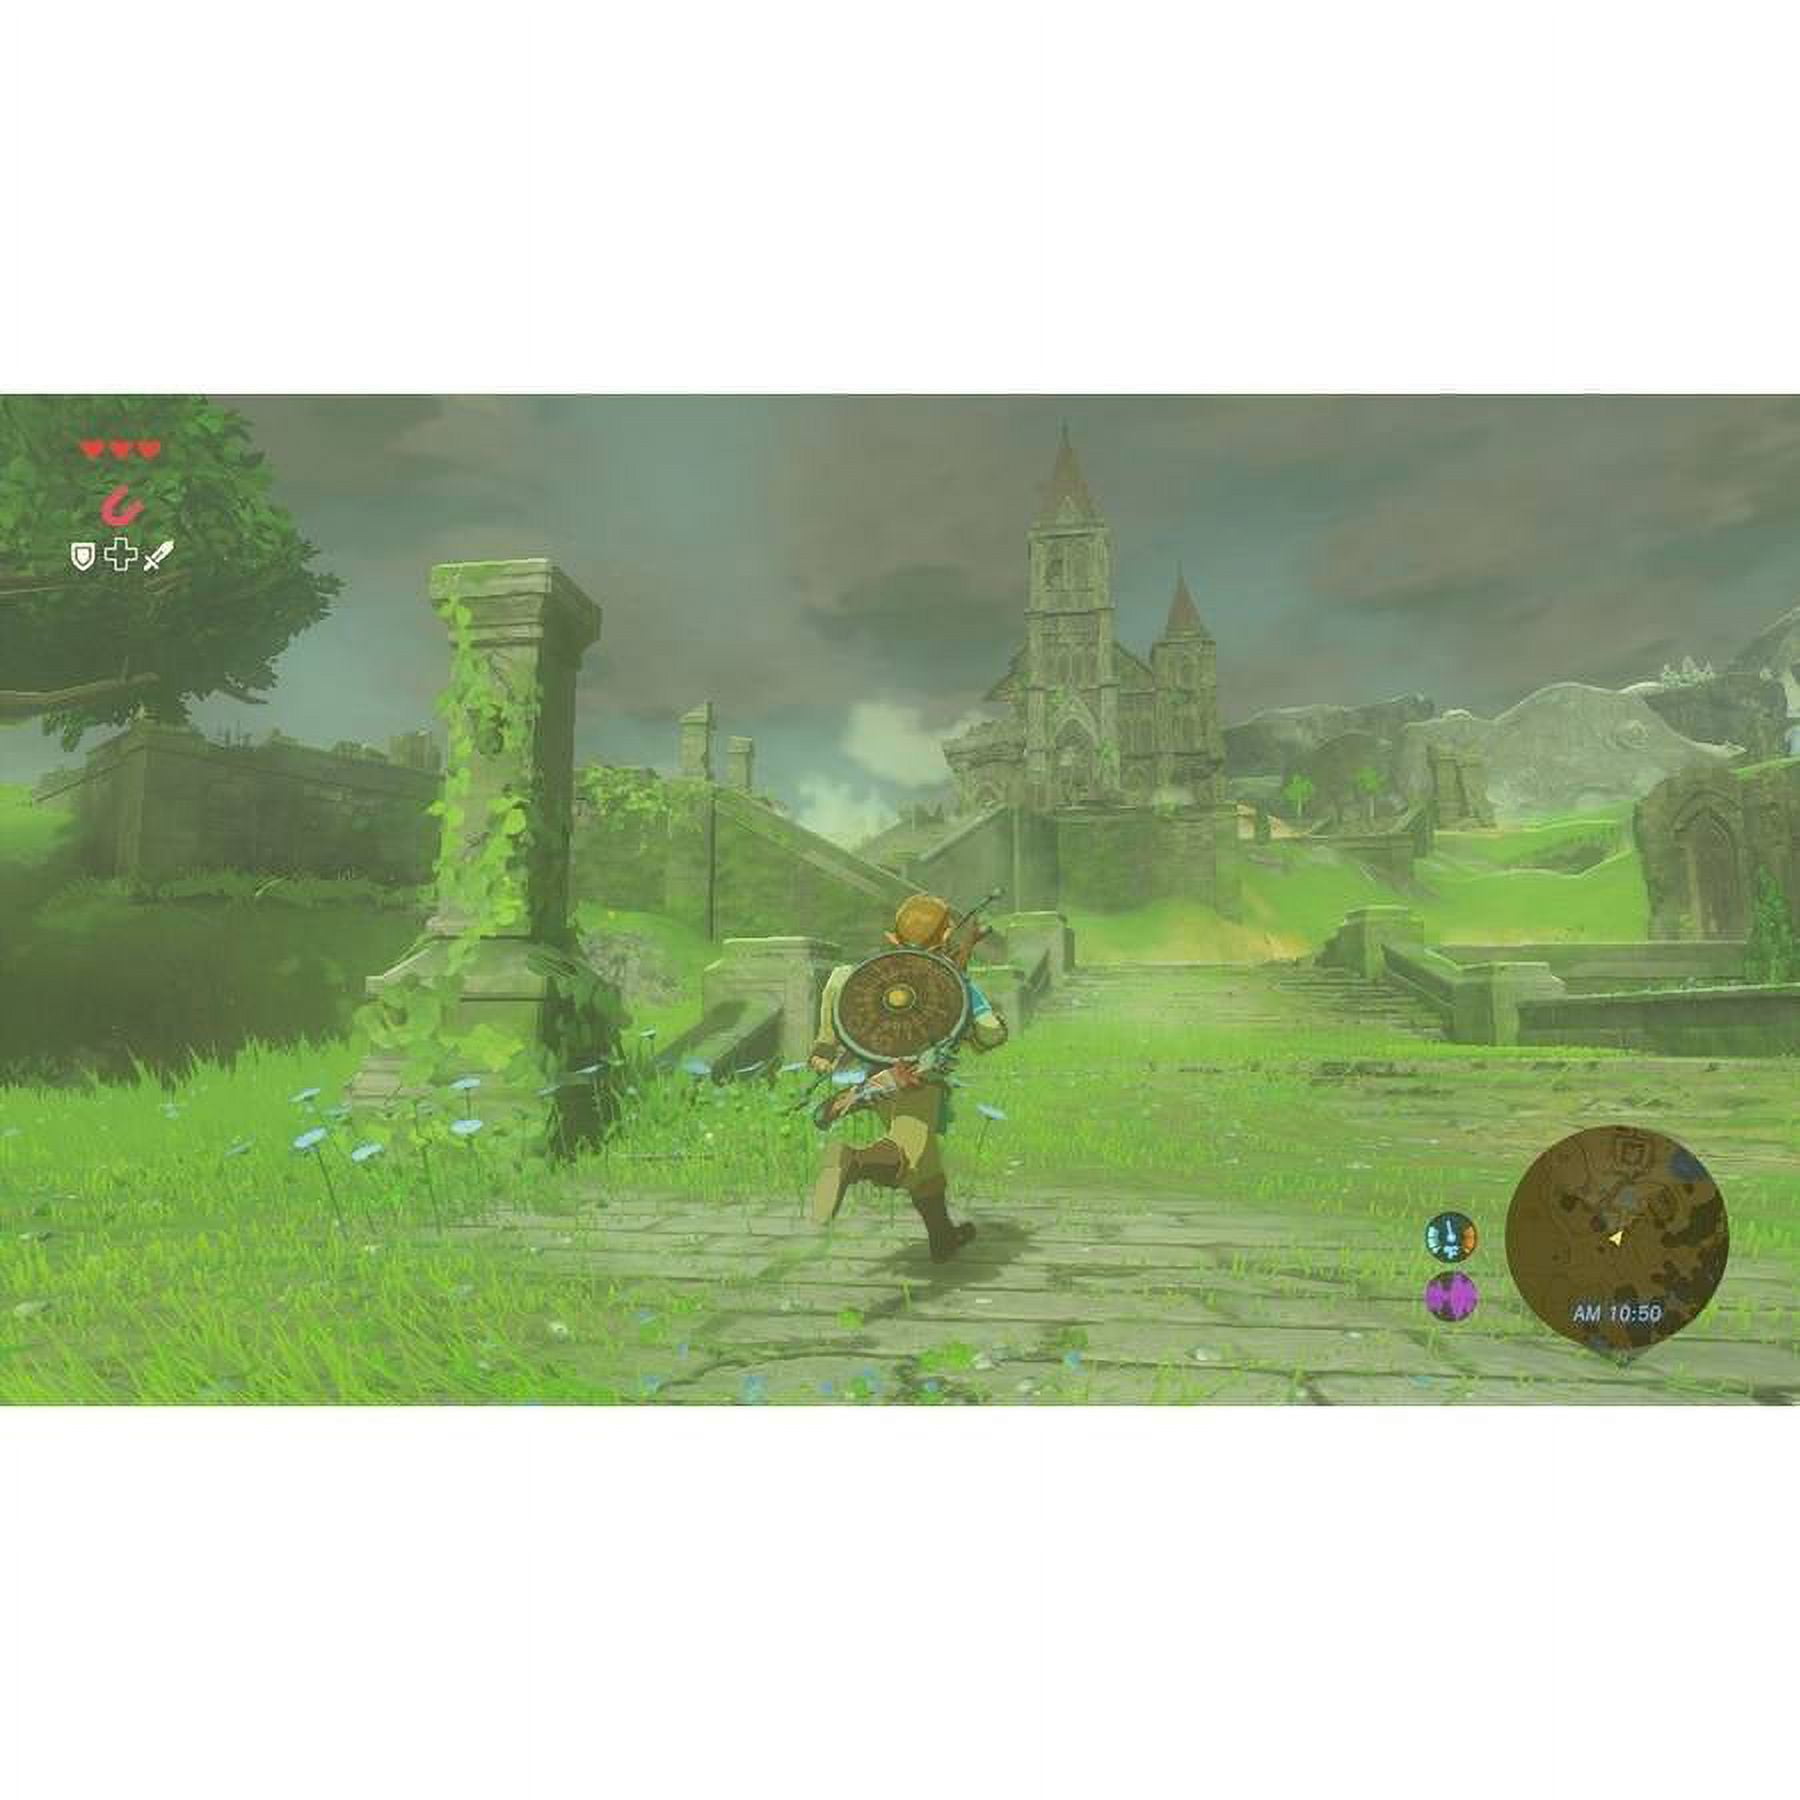 Physical copies of Zelda: Breath of the Wild for Wii U require a 3 GB  install